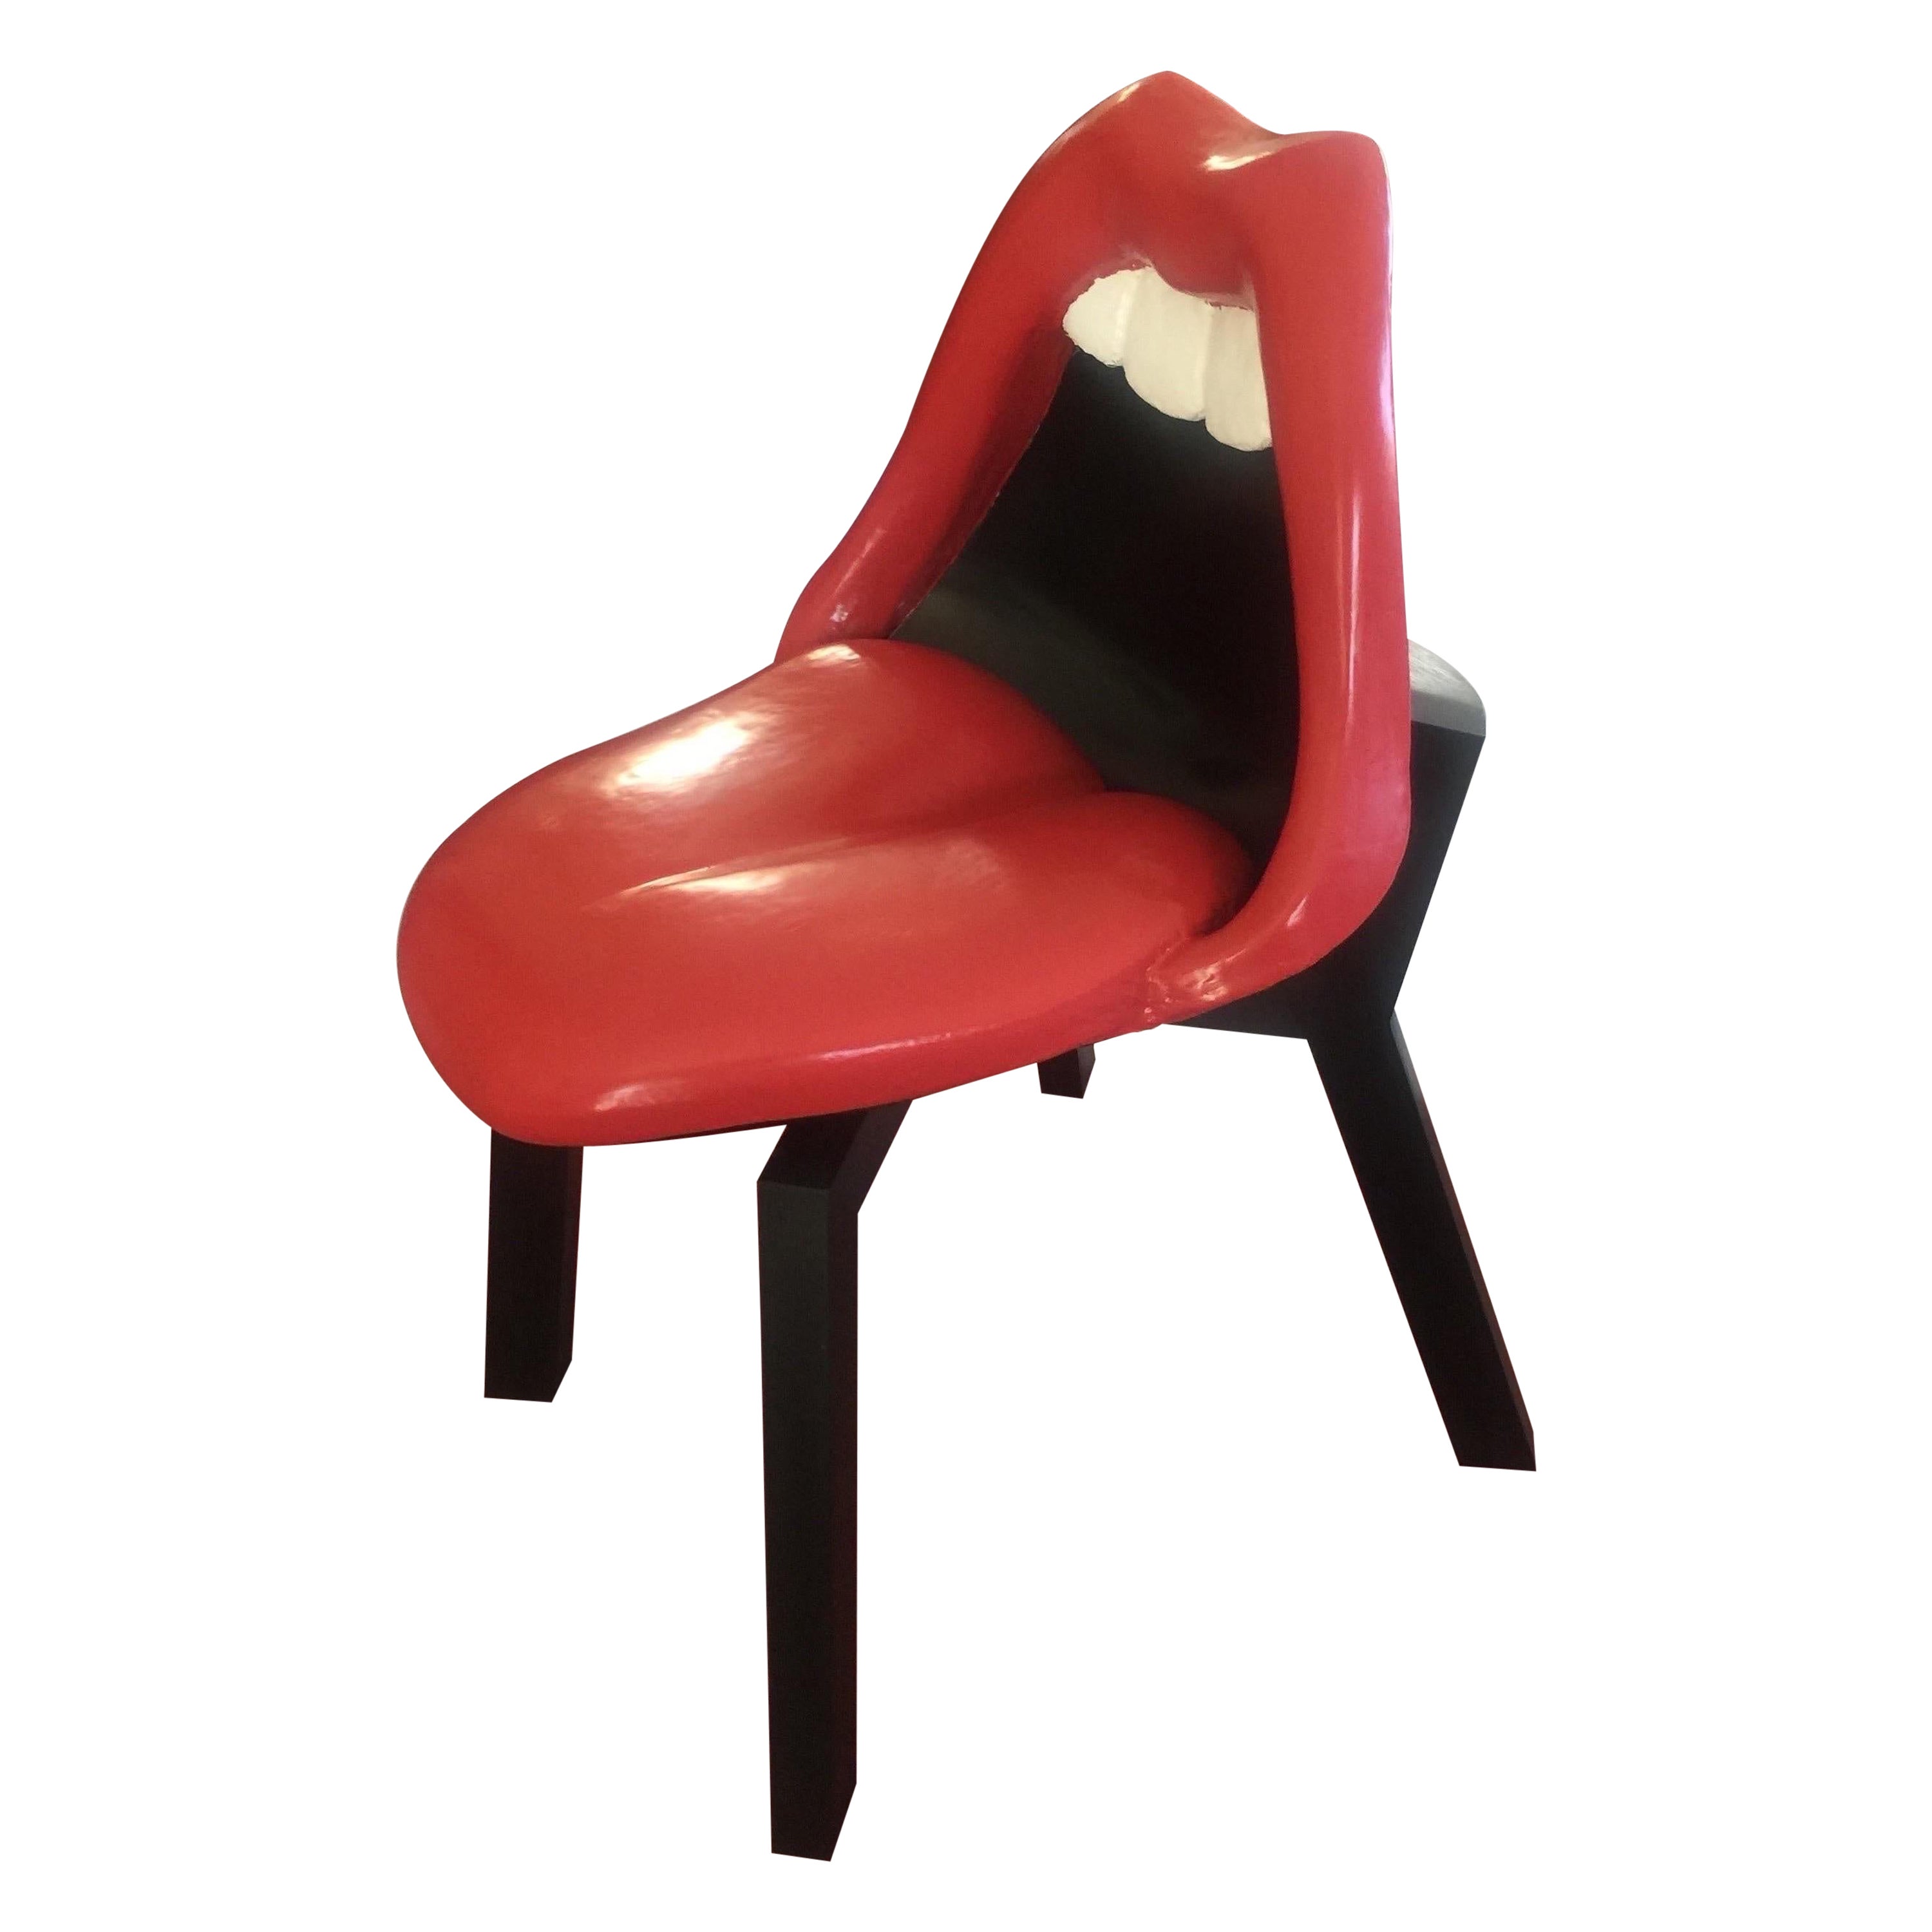 The Tongue and lip chair, Denmark 2021